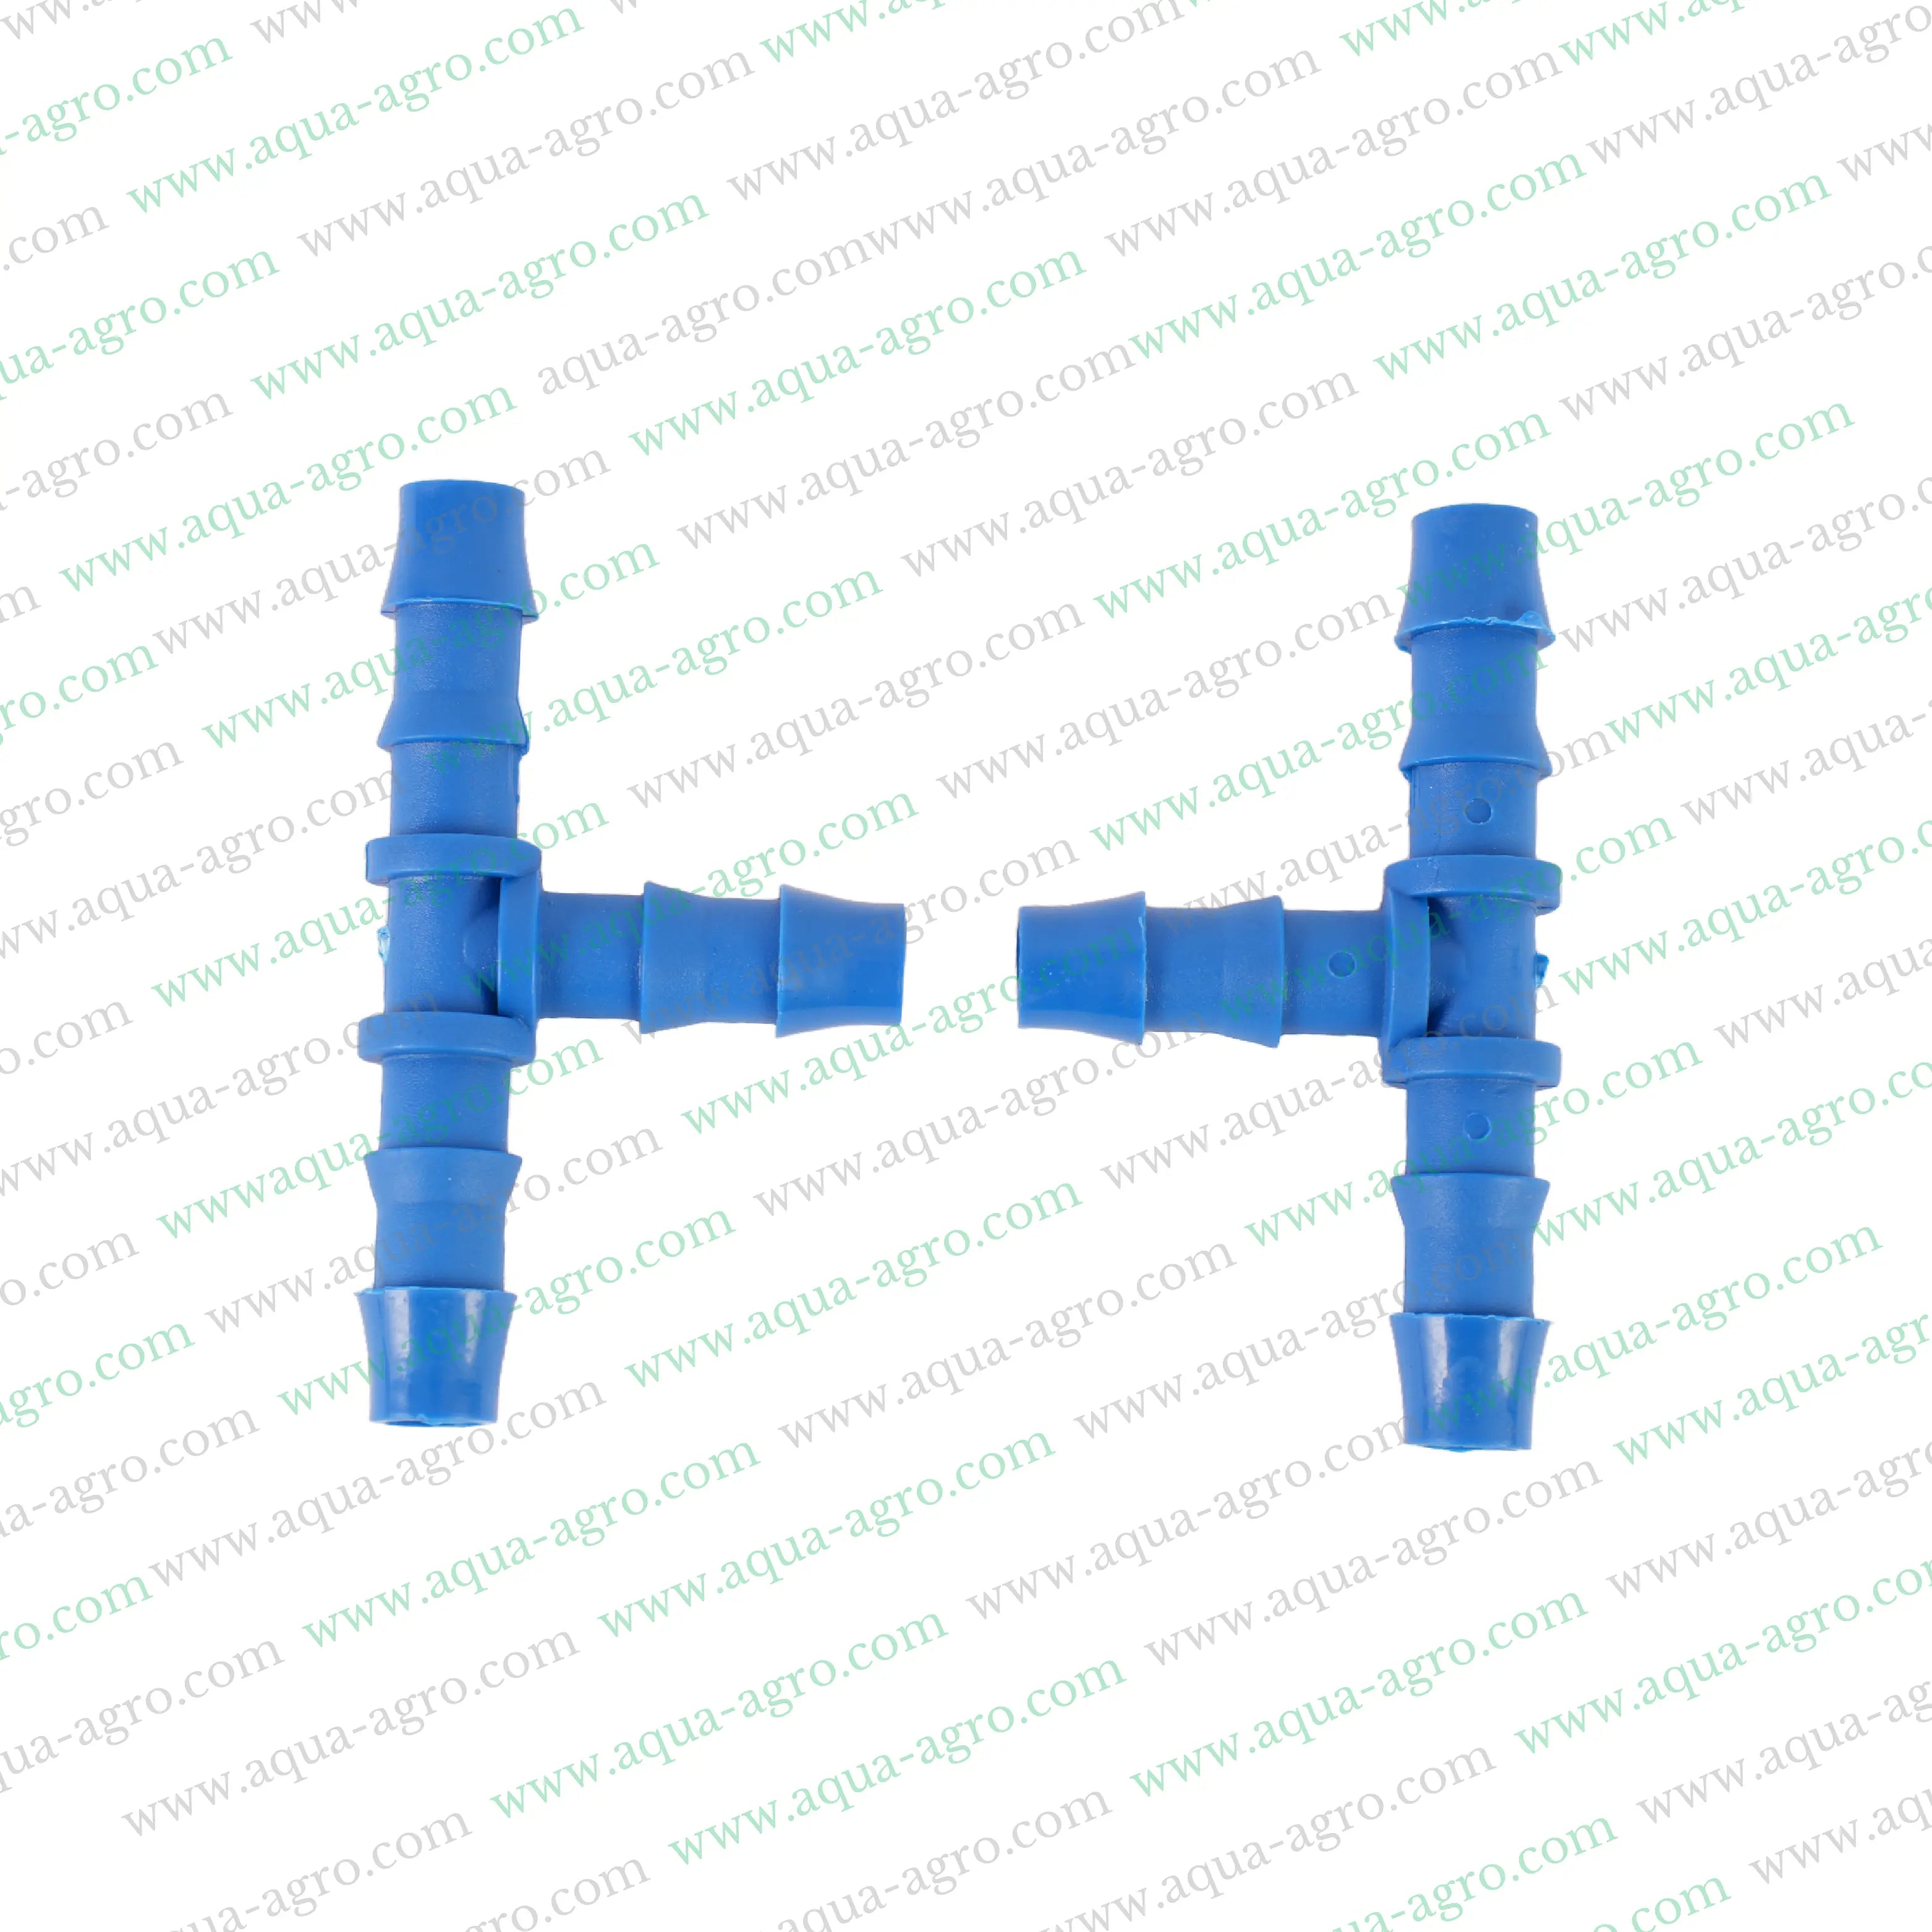 AQUA - AGRO | Drip Fittings And Accessories - Barbed Fittings - Lite - Tee - 12mm